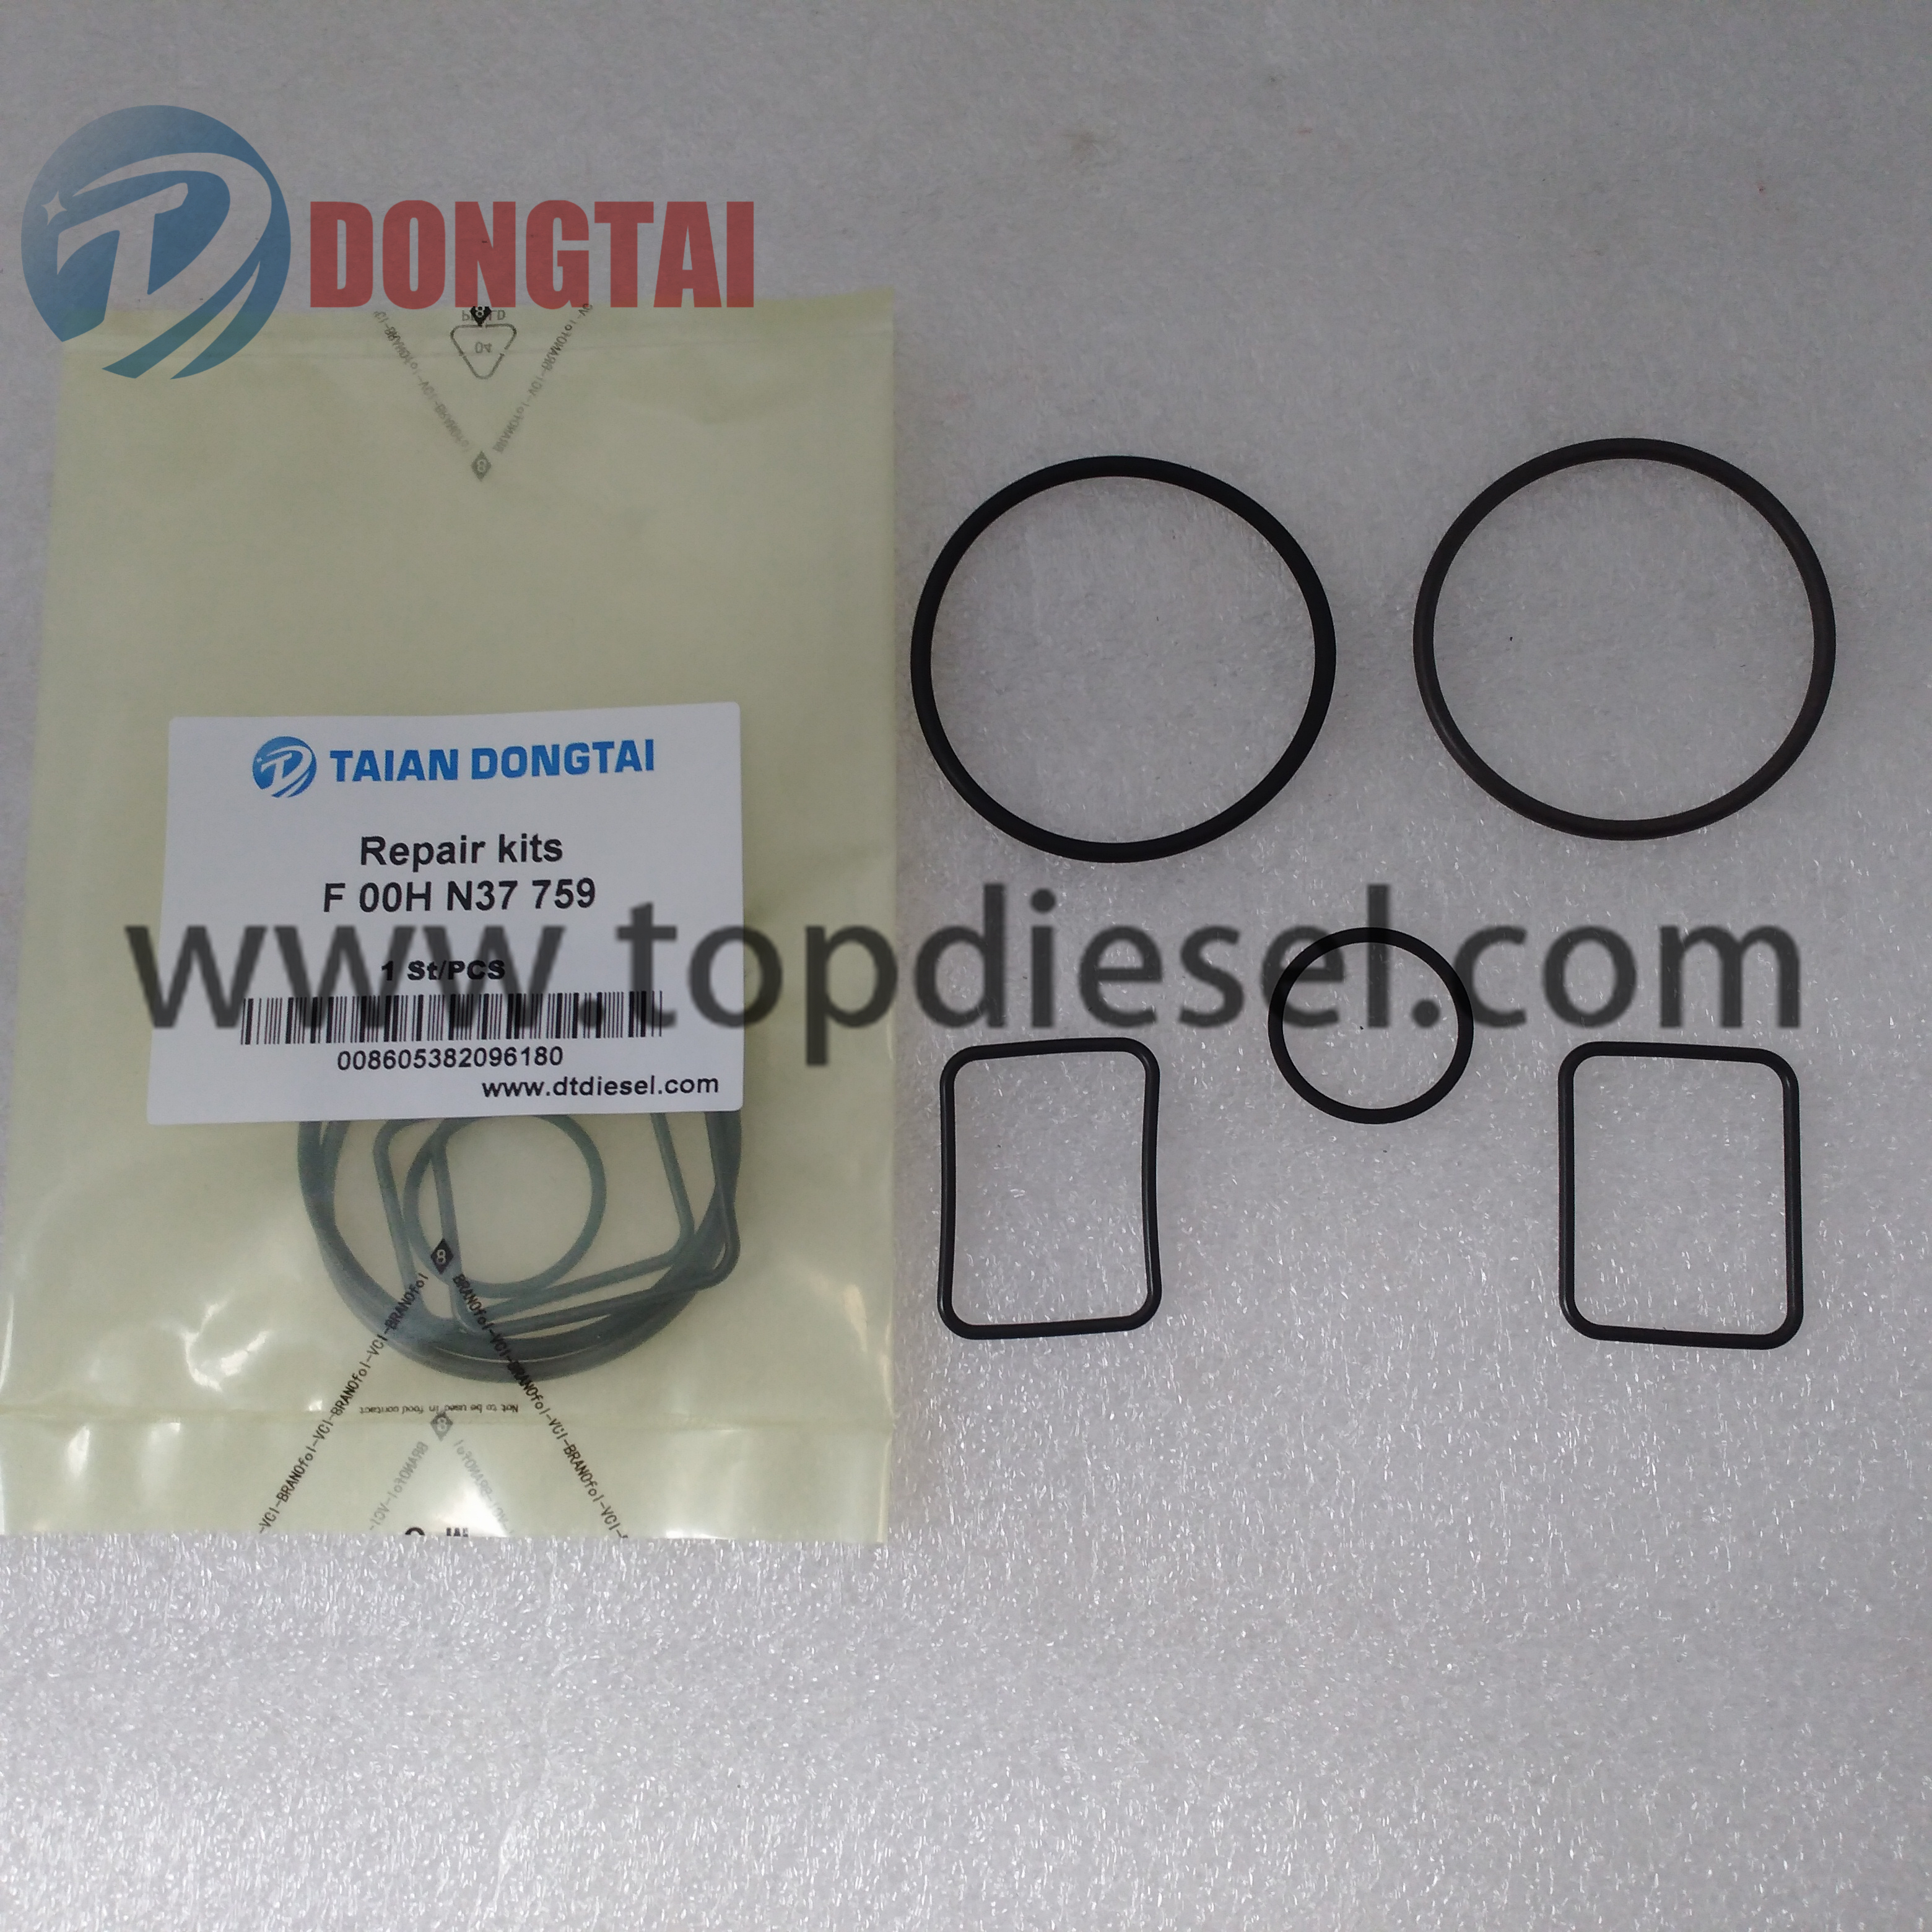 Wholesale Price China Aftermarket Petrol Fuel Injector - No,108(18) Bosch Repair Kits F 00H N37 759 For EUP Pump 0414799005 – Dongtai